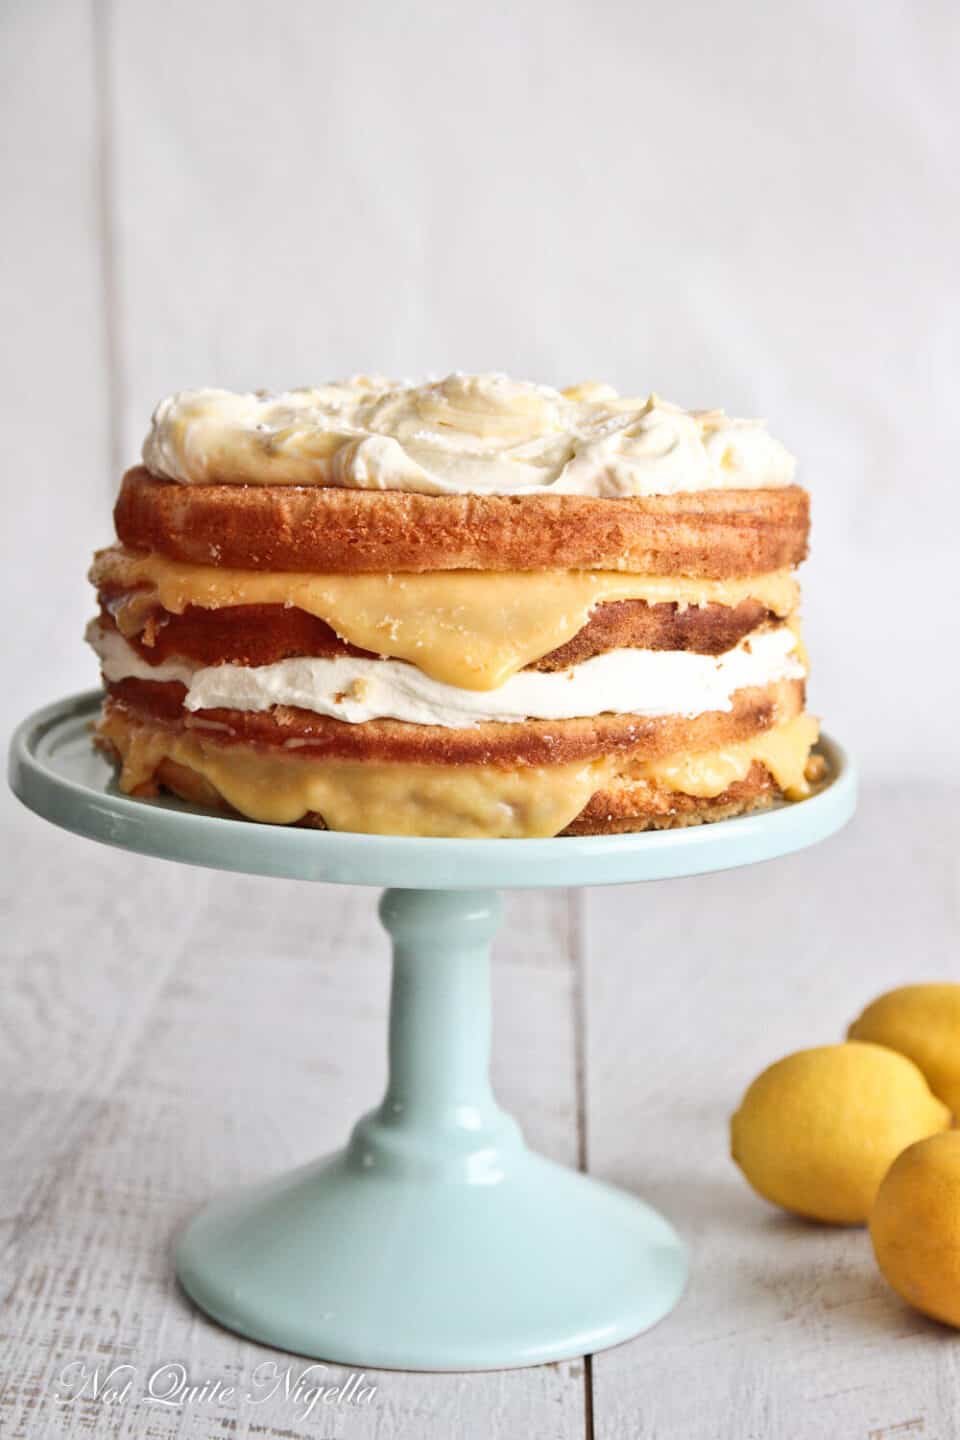 Craving for something sweet this spring and summer? We have lemon bars, cakes, tarts, cookies, cheesecake, and more best easy lemon dessert recipes for you to try! spring dessert recipes, summer dessert, summer dessert recipes.